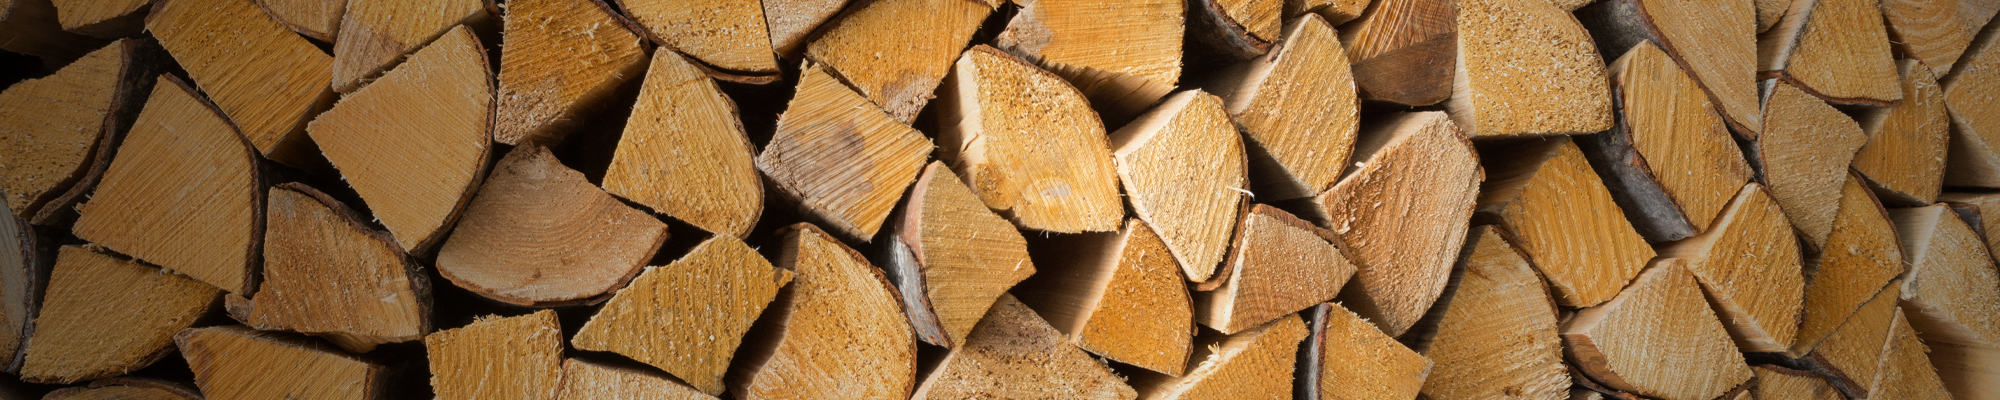 Everything You Need to Know about Kiln-Dried Wood in a Nutshell